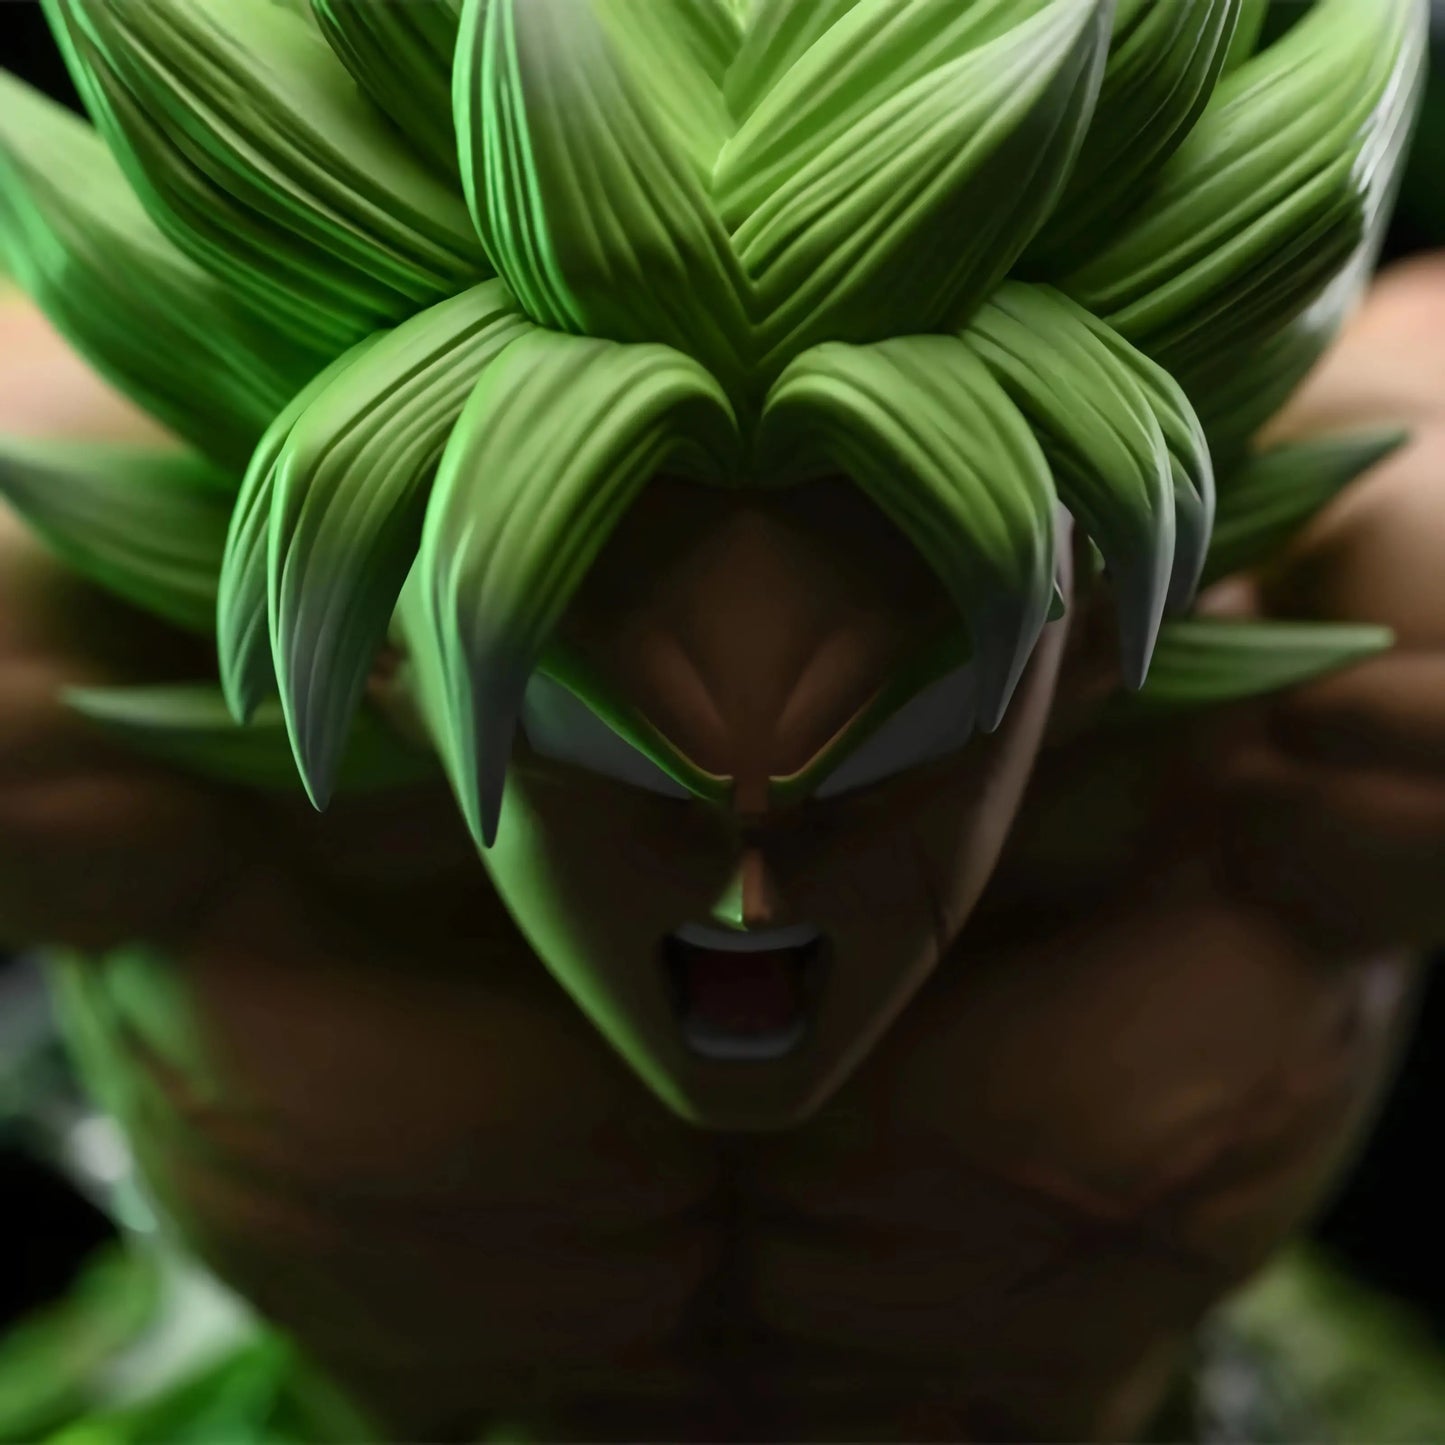 Close-up view of the Dragon Ball figure Broly's fierce expression, emphasizing his green hair and the intense details of his muscular build.